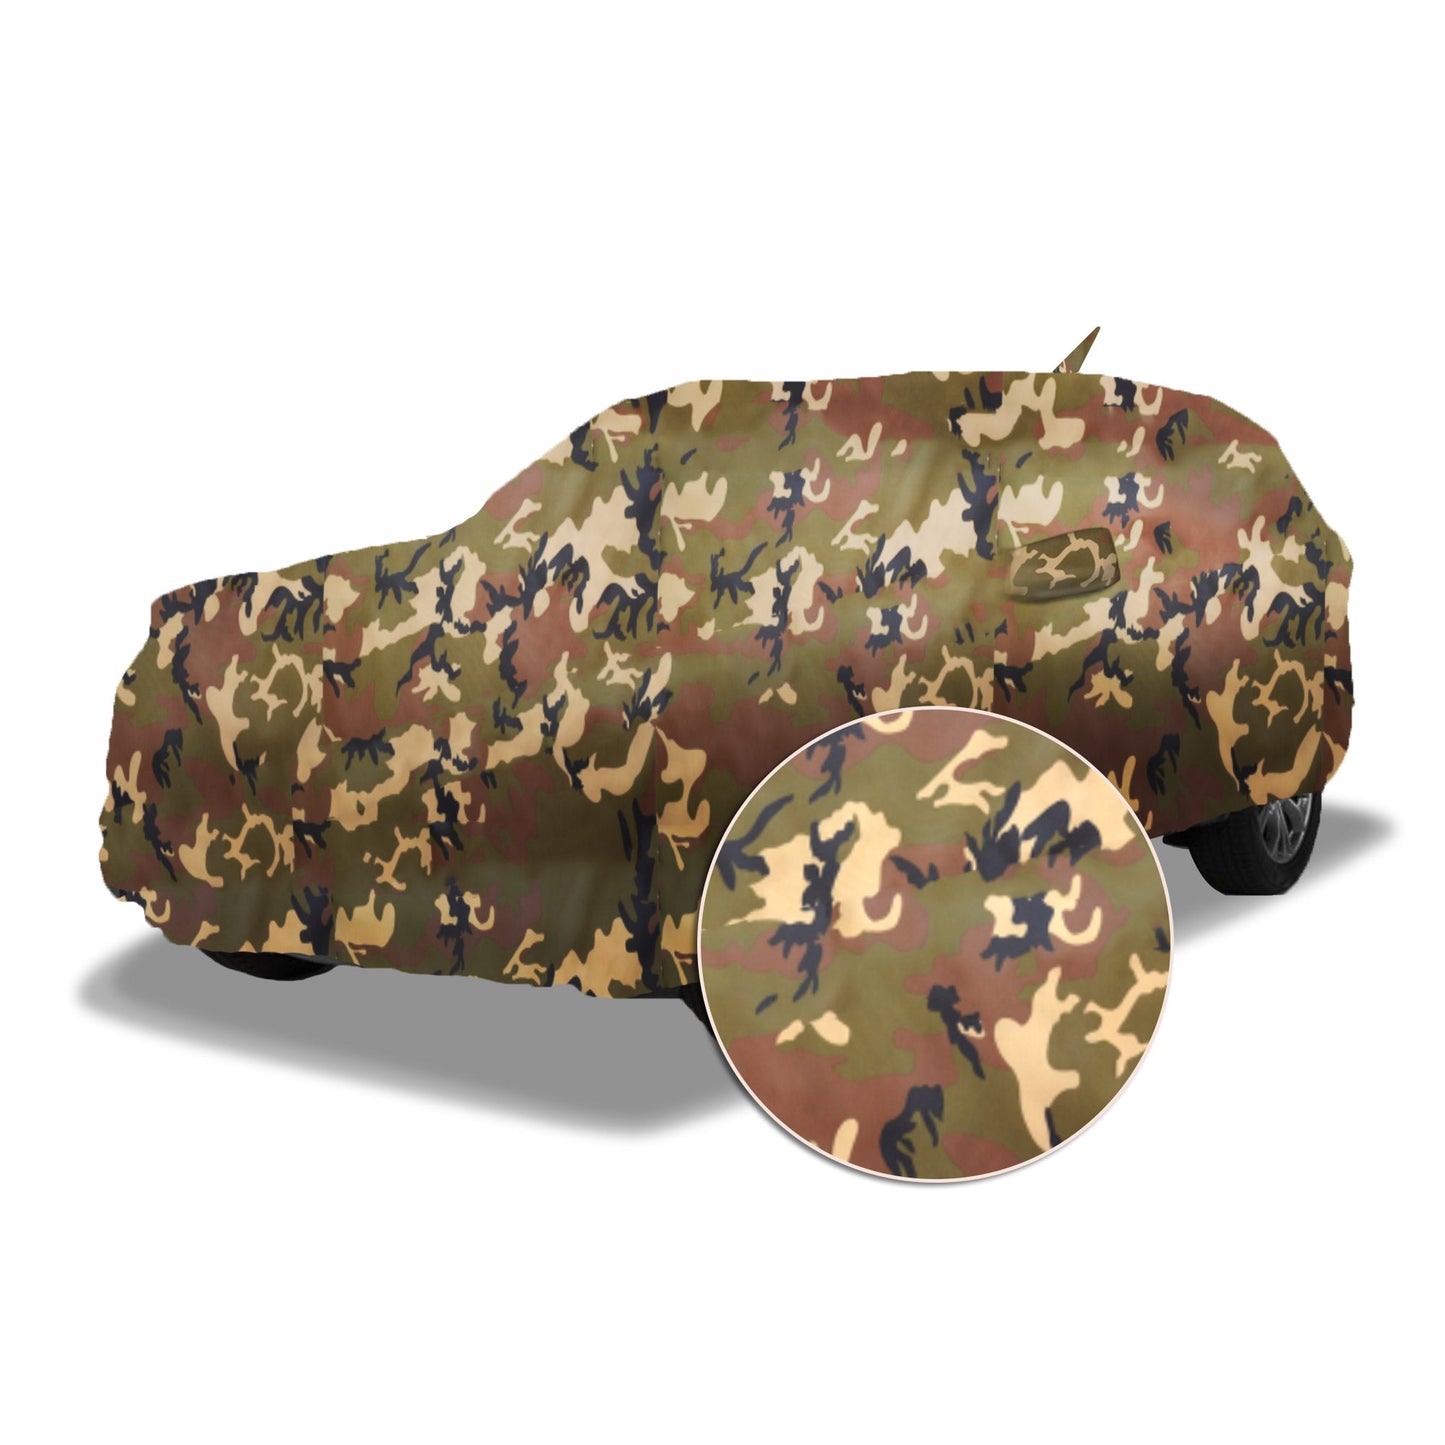 Ascot Volvo XC40 Recharge Car Body Cover Extra Strong & Dust Proof Jungle Military Car Cover with UV Proof & Water-Resistant Coating